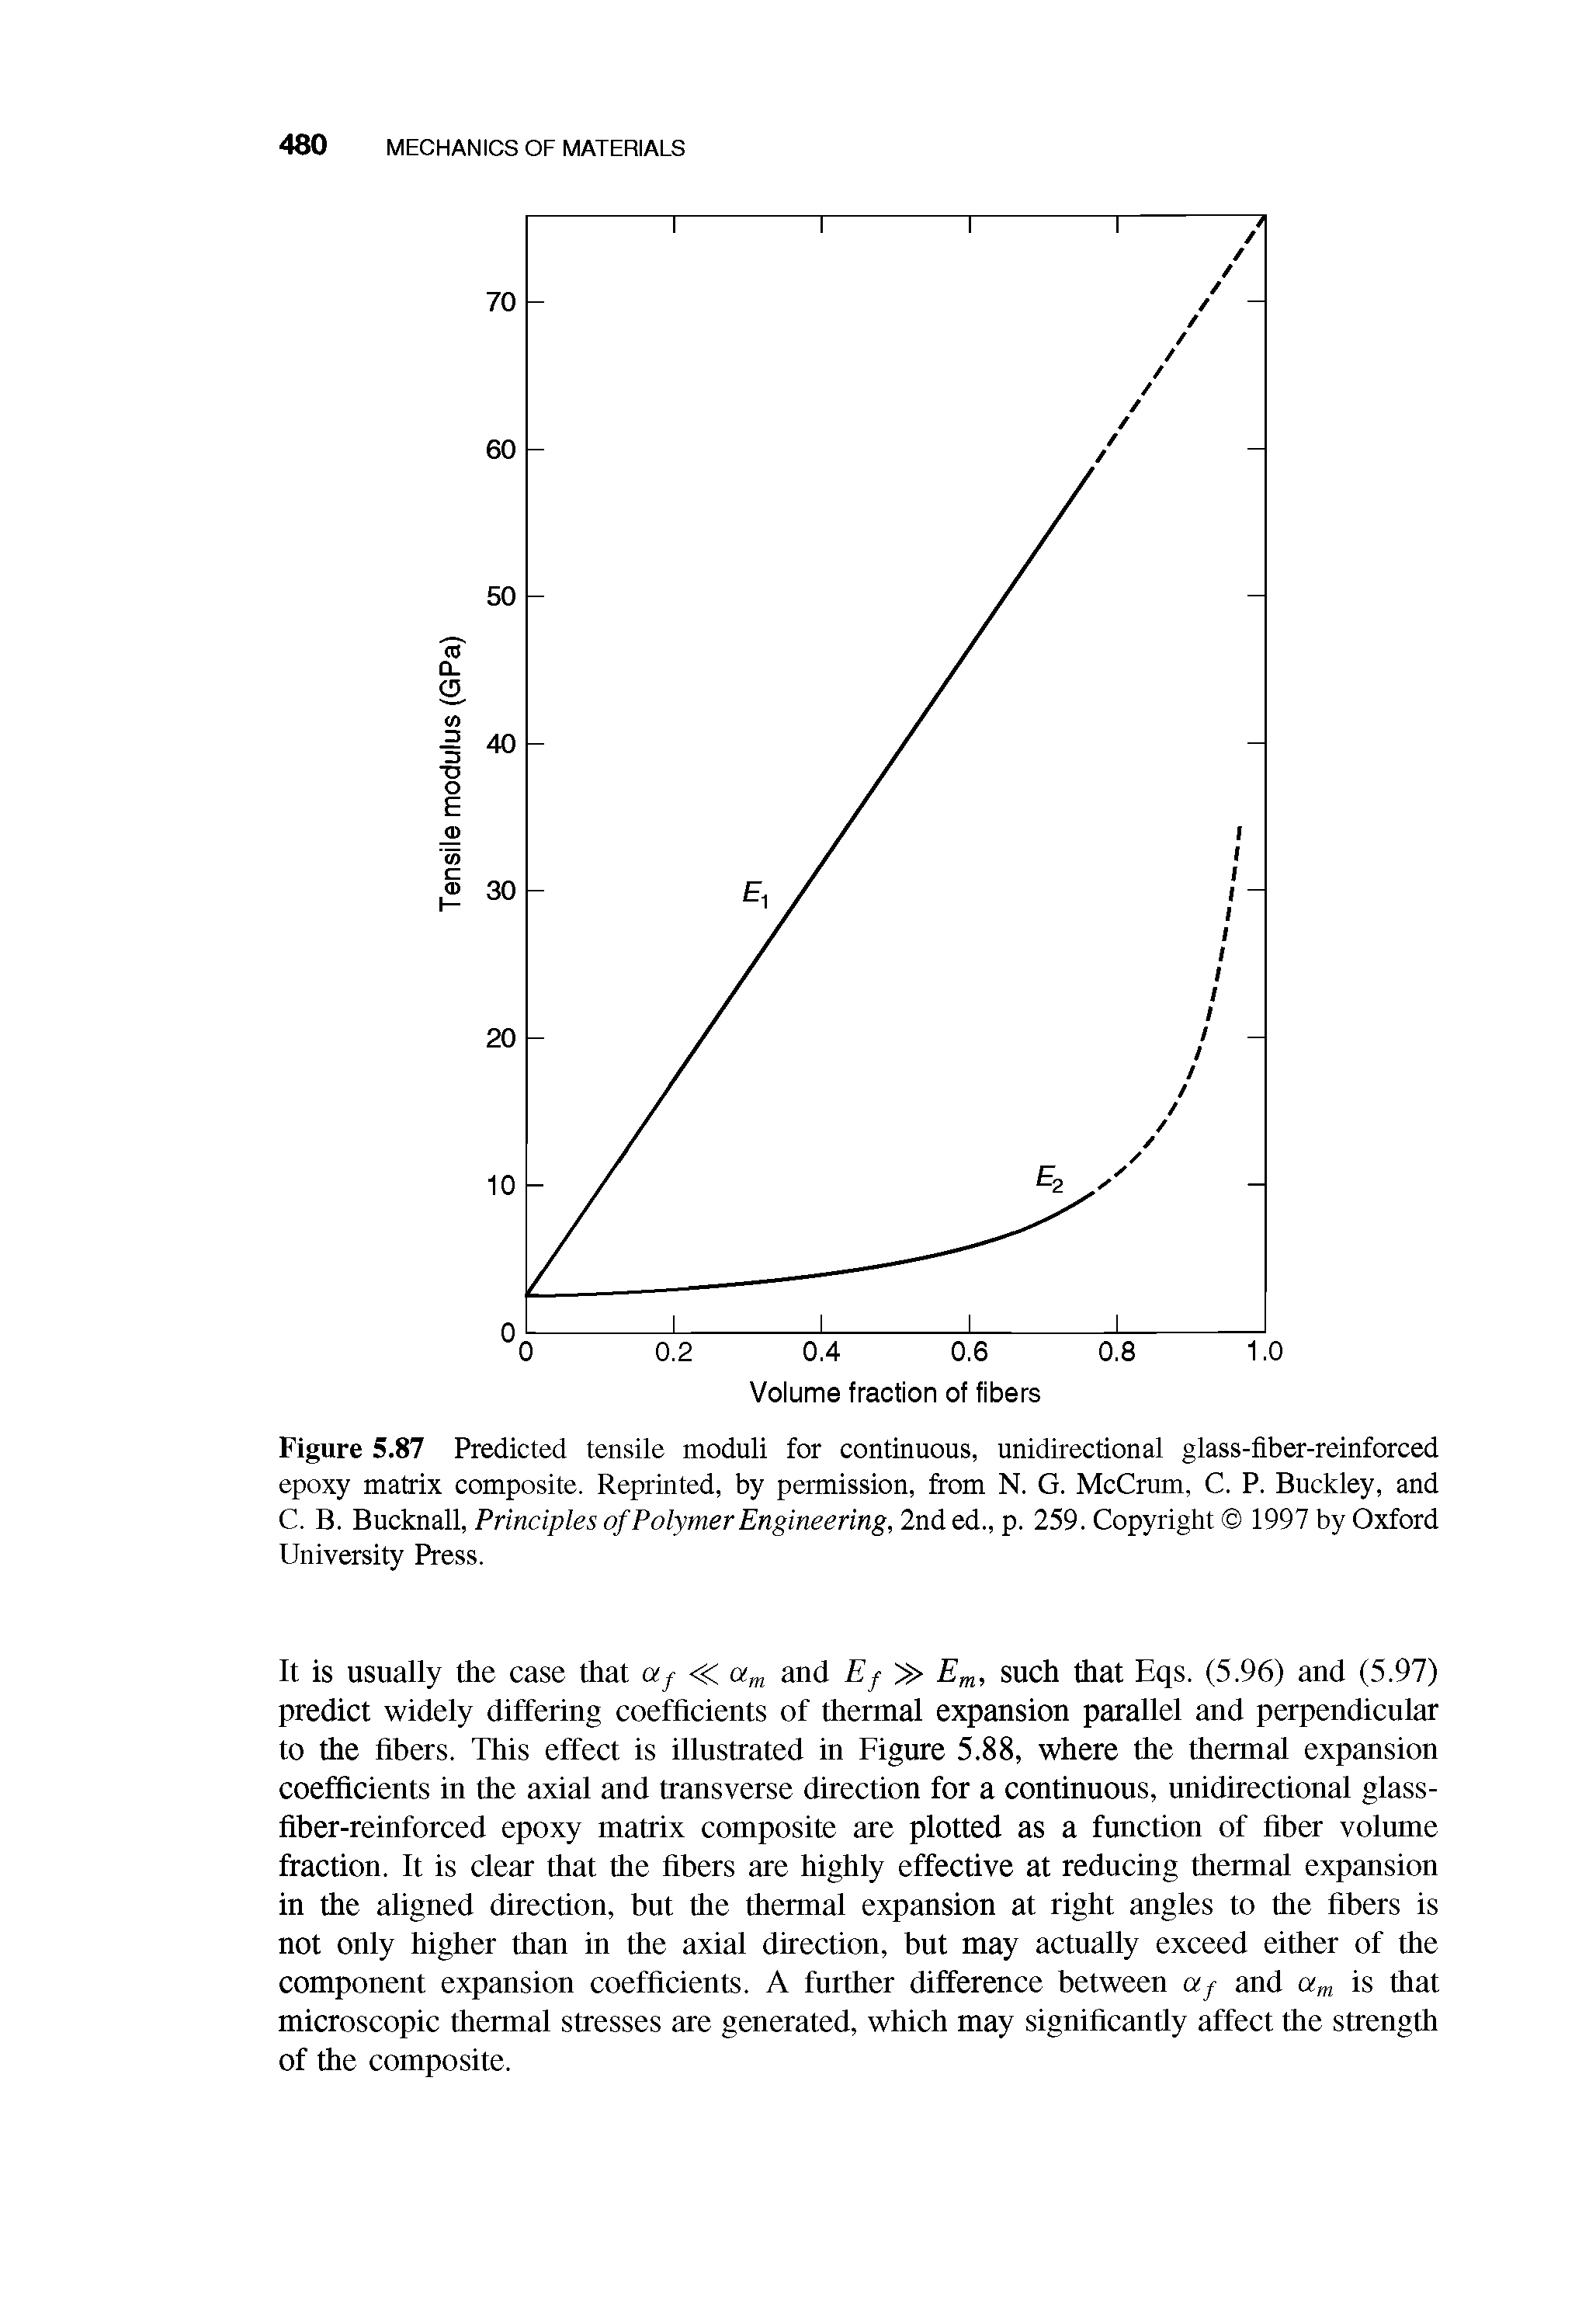 Figure 5.87 Predicted tensile moduli for continuous, unidirectional glass-fiber-reinforced epoxy matrix composite. Reprinted, by permission, from N. G. McCrum, C. P. Buckley, and C. B. Bucknall, Principles of Polymer Engineering, 2nd ed., p. 259. Copyright 1997 by Oxford University Press.